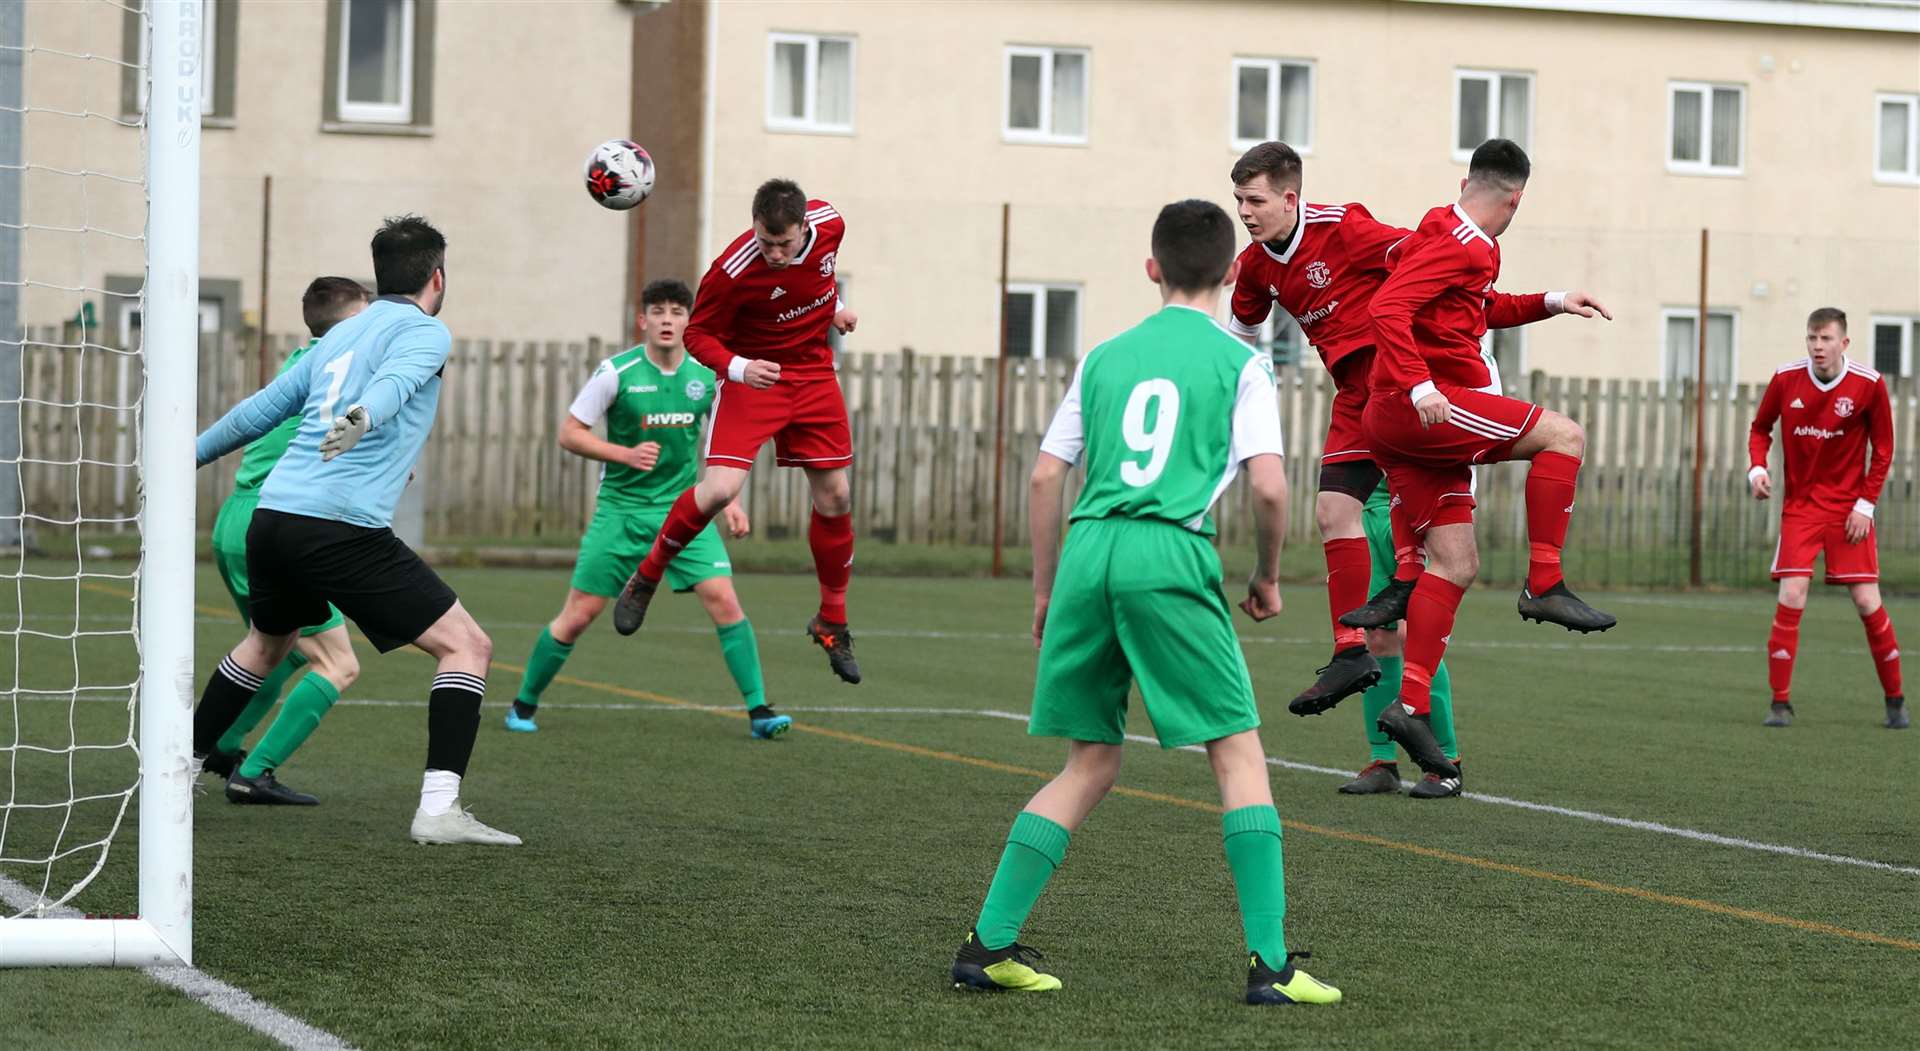 Allan Munro scores for the Vikings with a powerful header. Picture: James Gunn